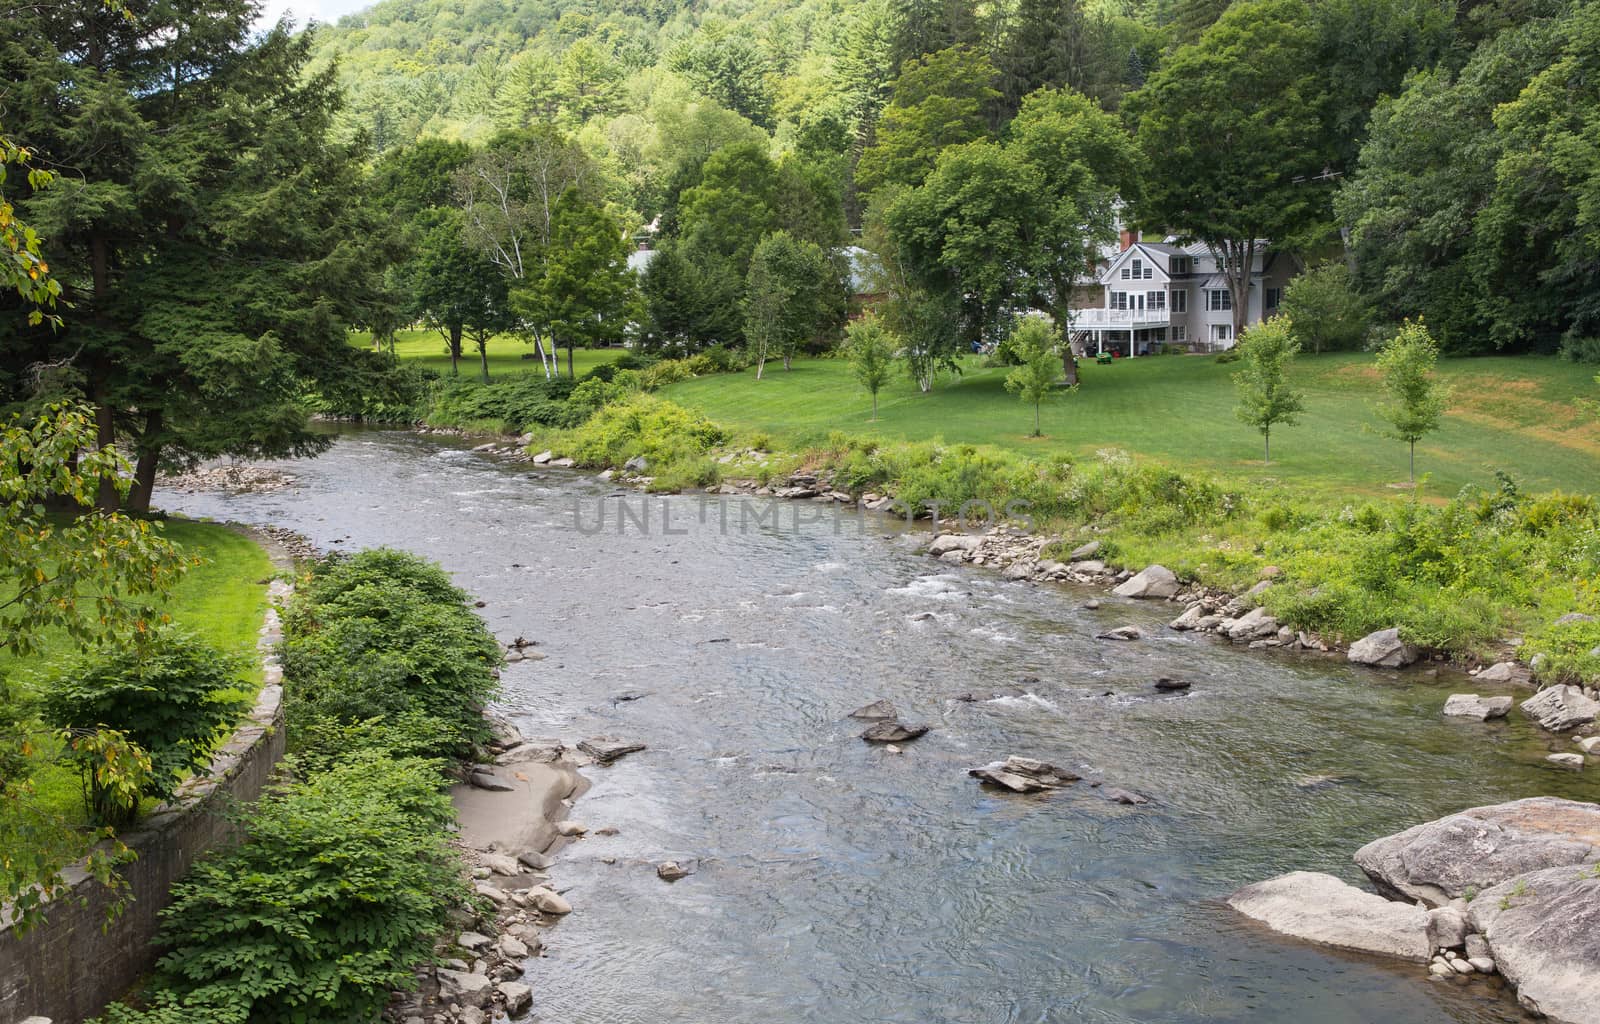 This Vermont river, the Ottauquechee, flows right through the middle of the small town of Woodstock.